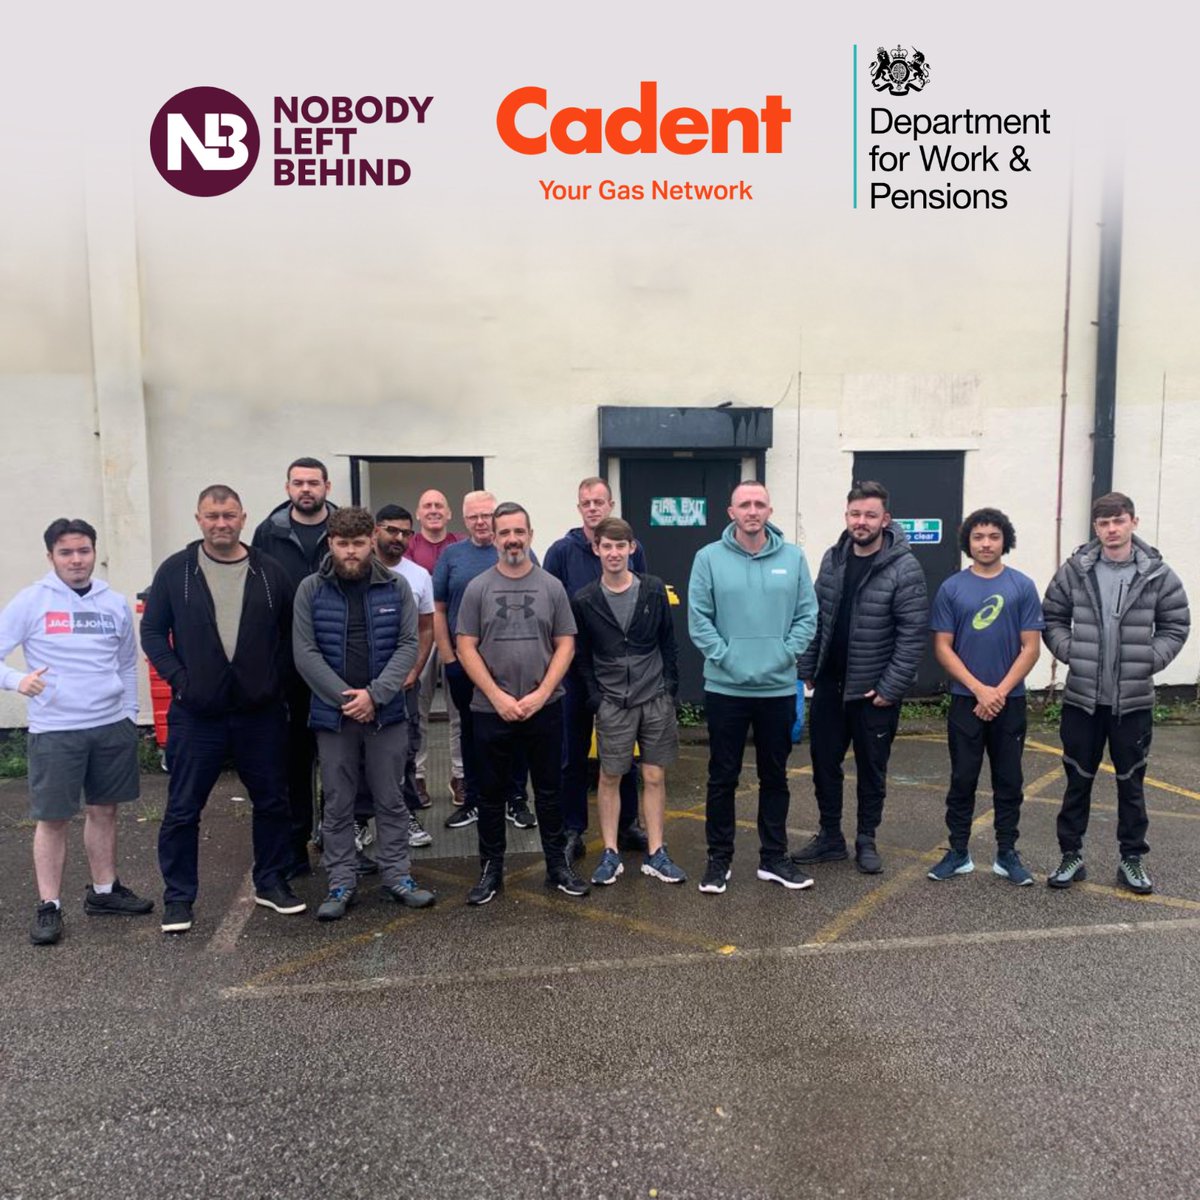 Our @dwpgovuk funded cohort of learners are excelling this week in training ahead of interviews with @cadentgasltd NLB is proud to work with the UK’s largest gas distribution network and to be offering the same service in Greater Manchester very soon.